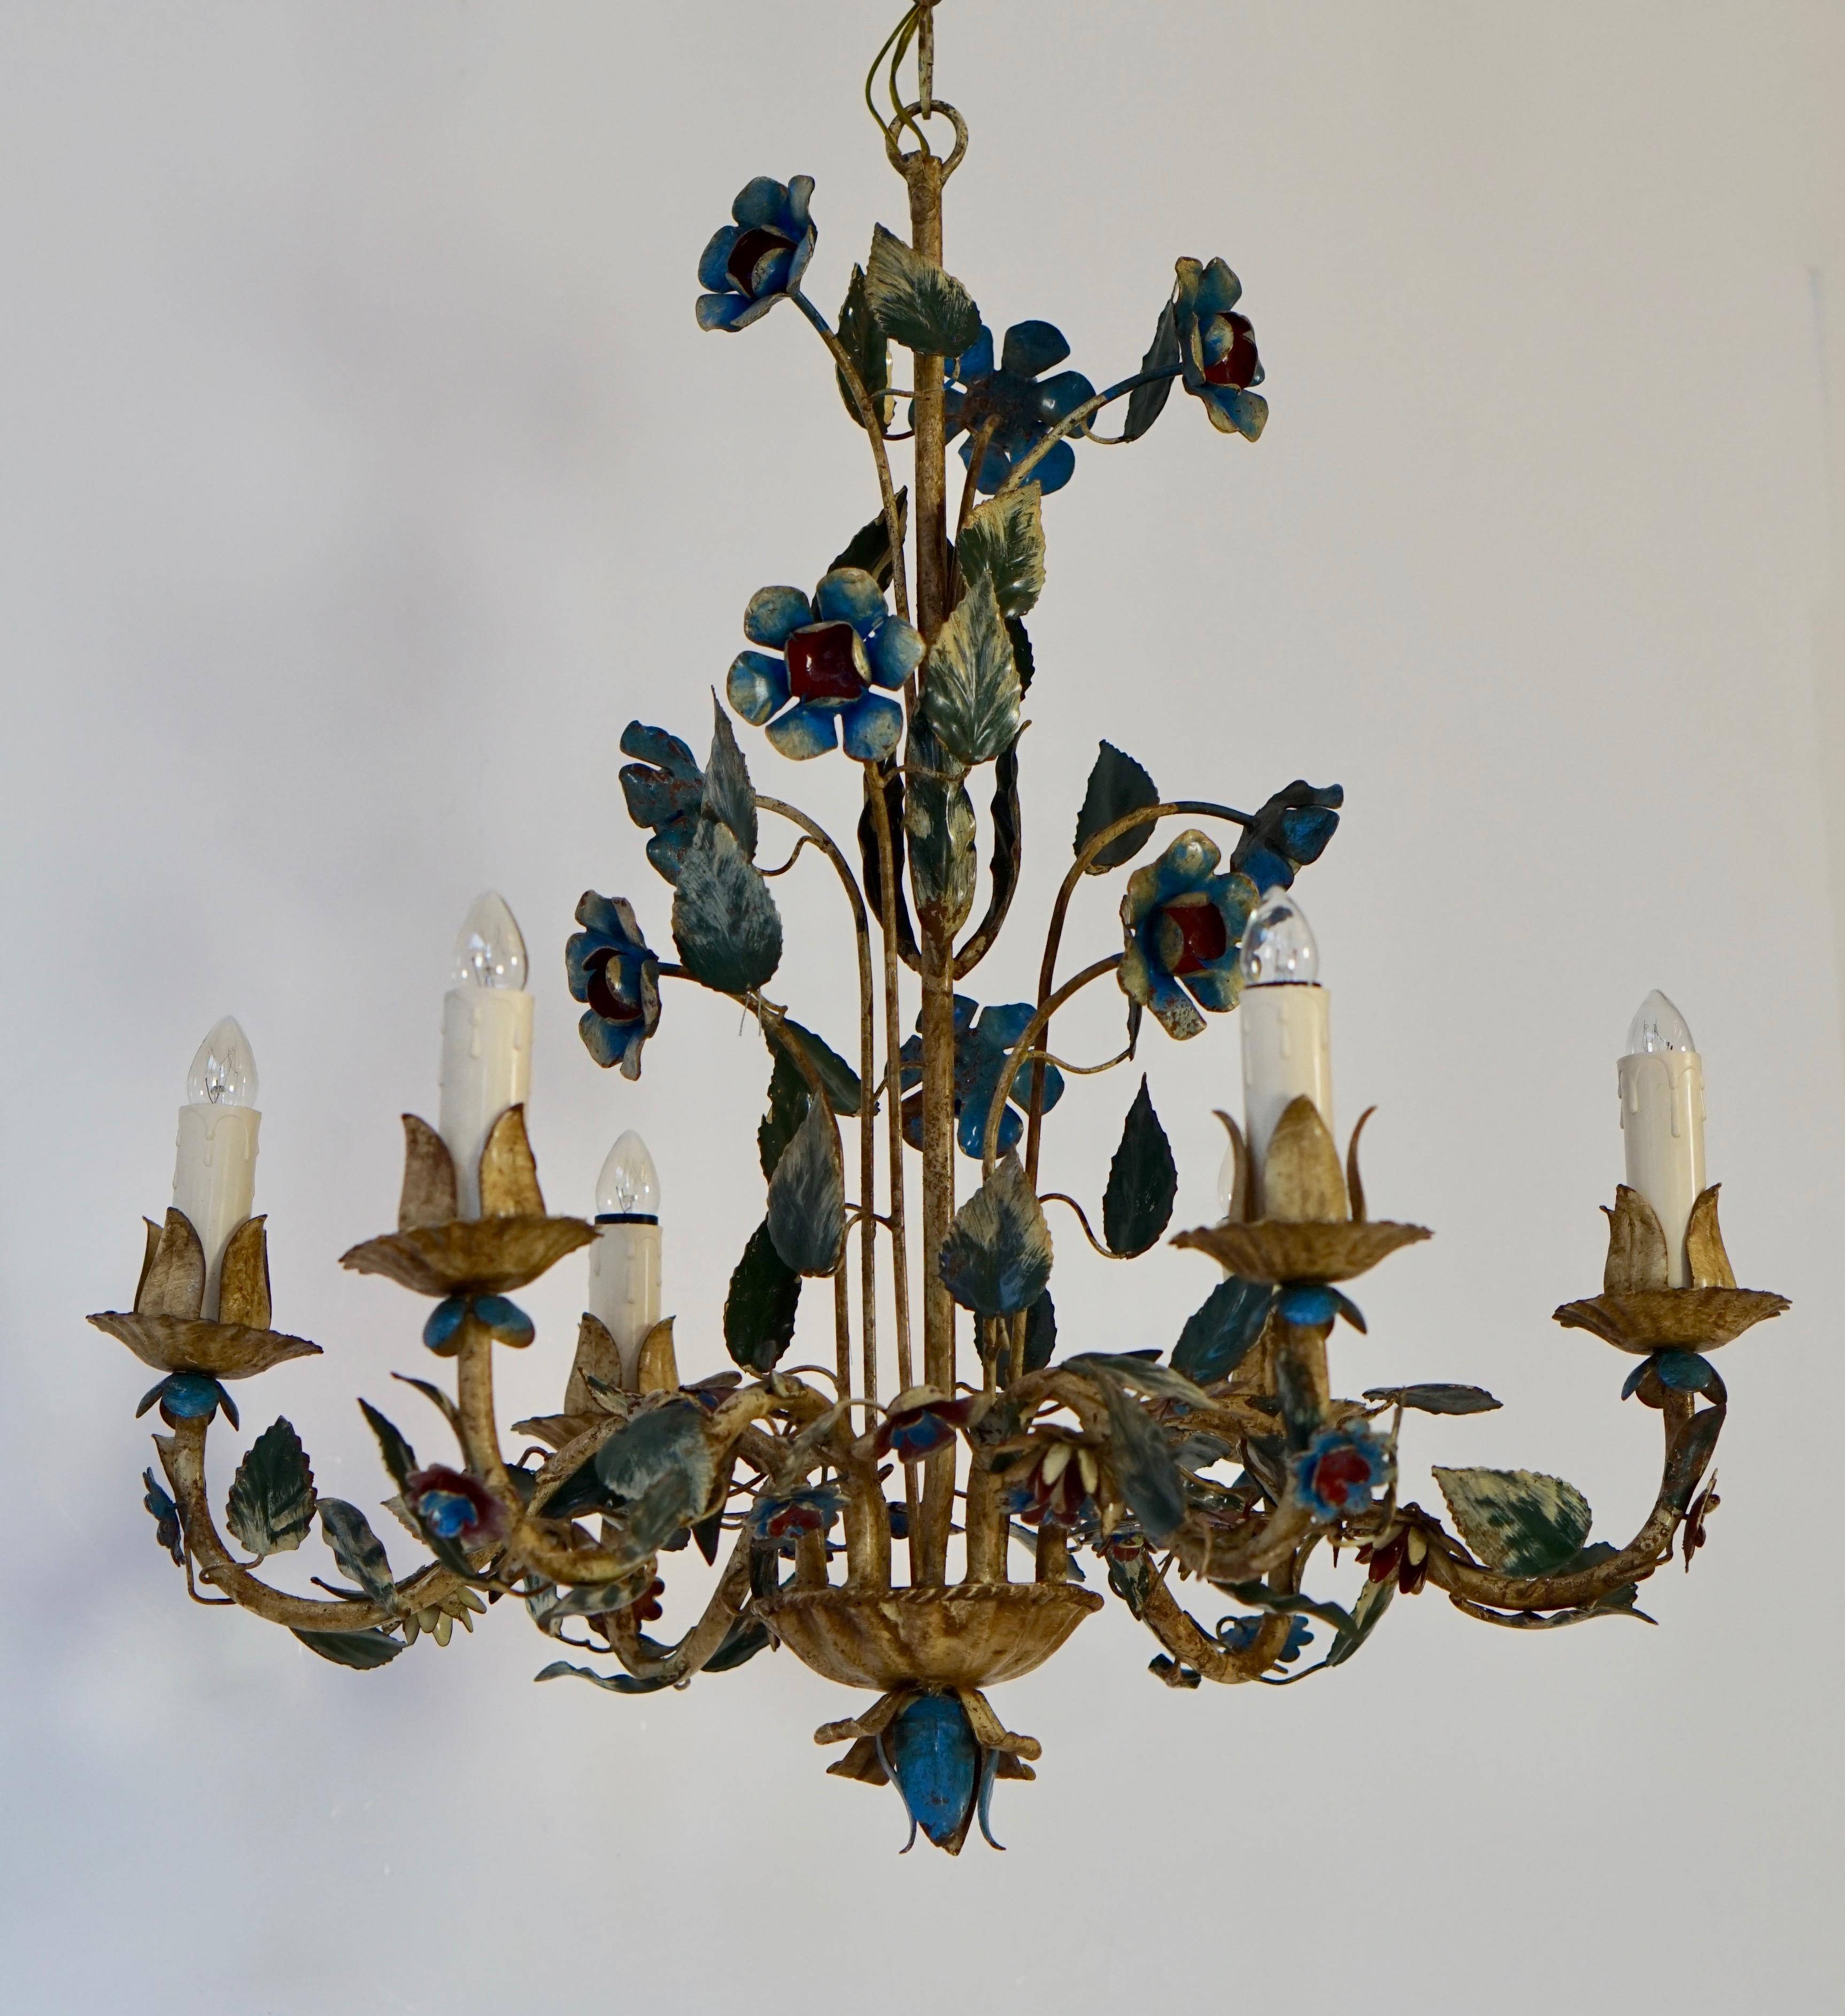 This elegant, vintage chandelier was crafted in Italy, circa 1950. The charming hanging light fixture has six lights and is embellished with realistic flowers and green leaves. The round chandelier is in very good condition and has its original